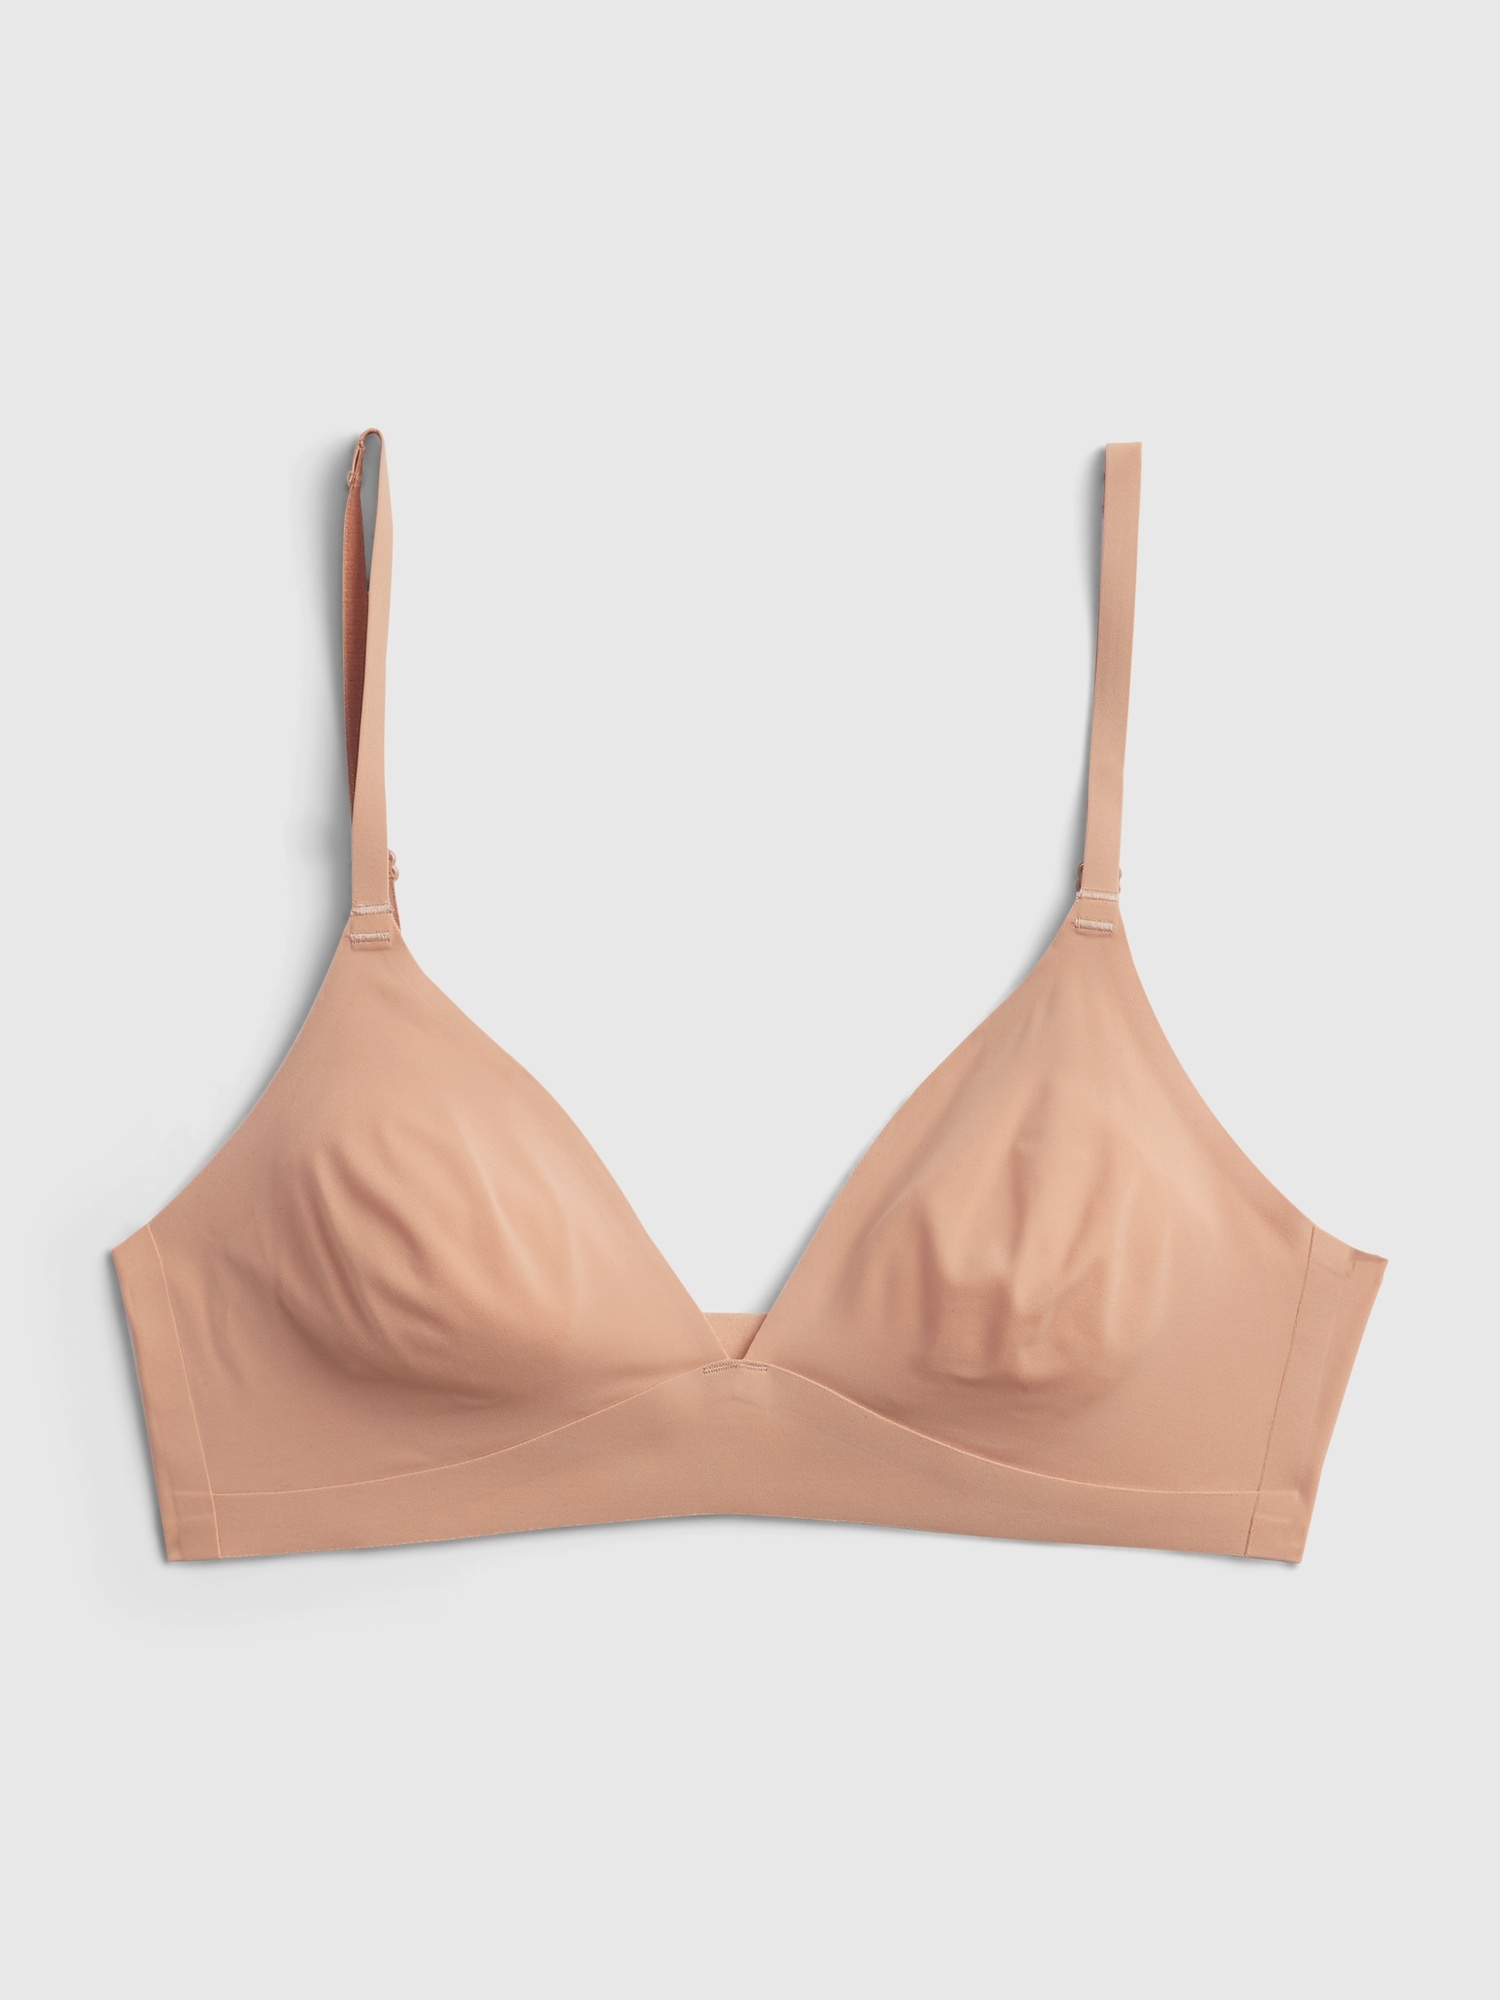 Non-marking Underwear, Small Breasts, Light Style, New Bra Without